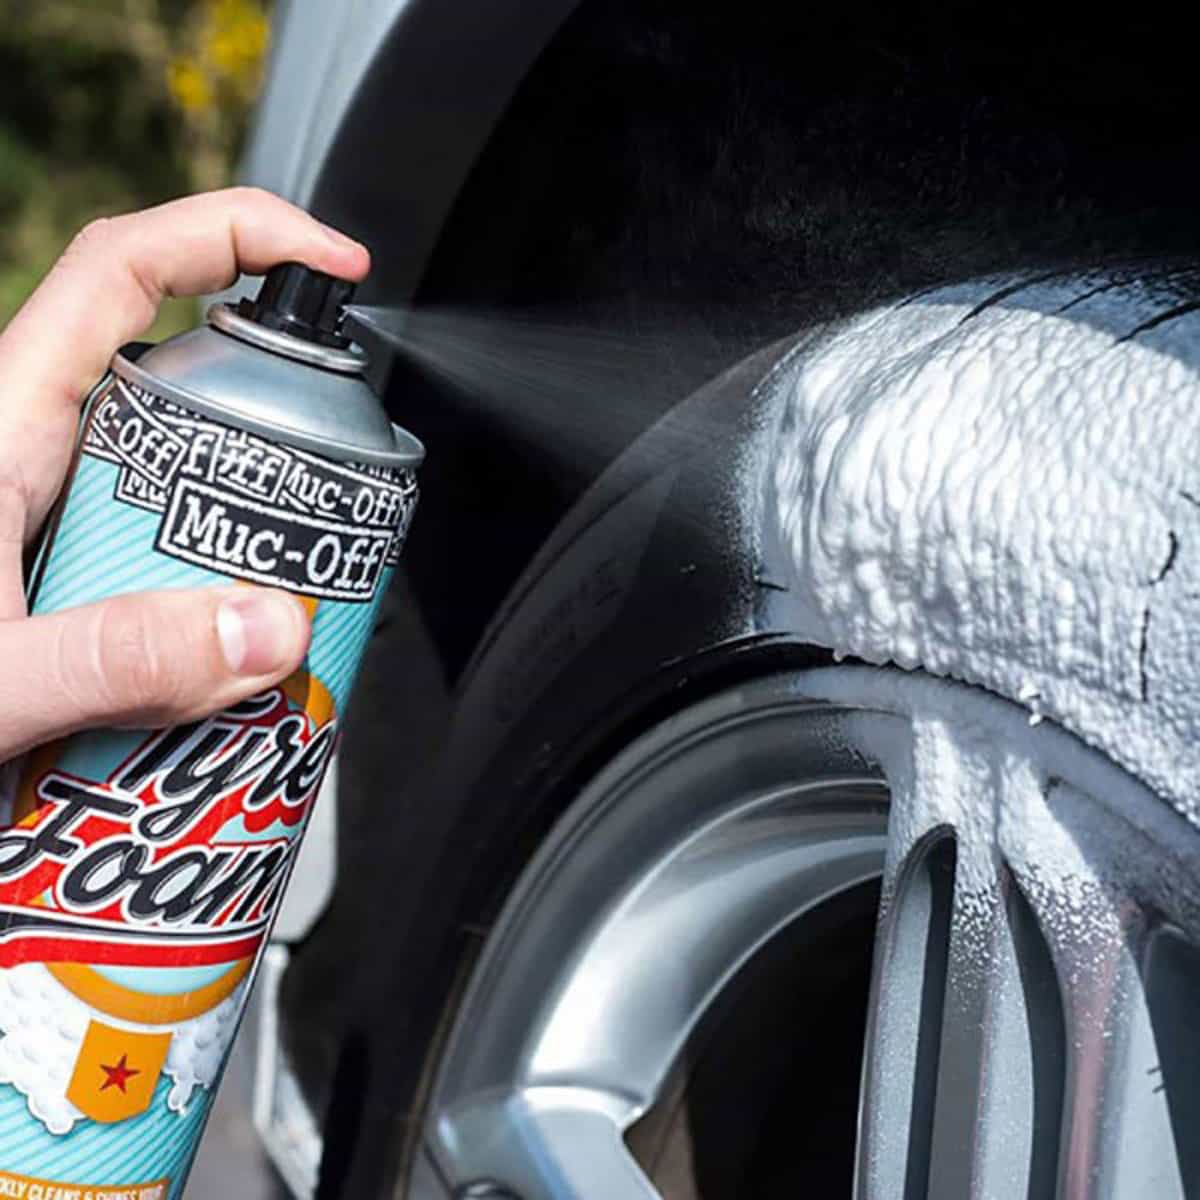 Revitalise your tyre rubber with the Muc-Off Tyre Foam cleaner that has been specifically formulated to be applied and act quickly.